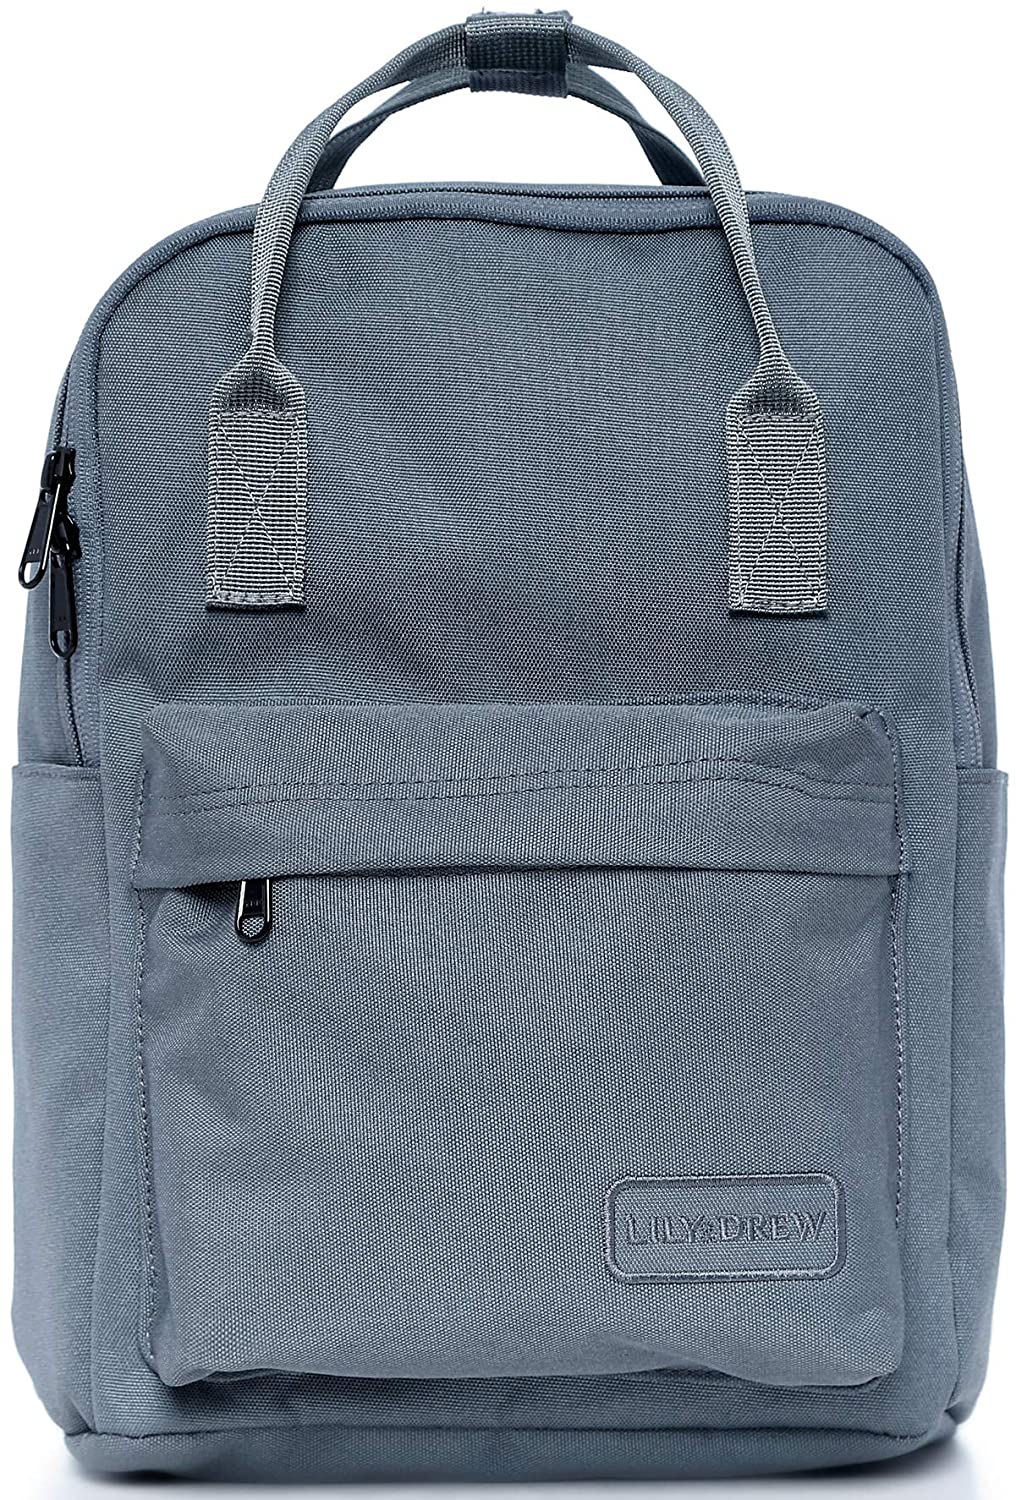 Lily-Drew-Casual-Travel-Daypack